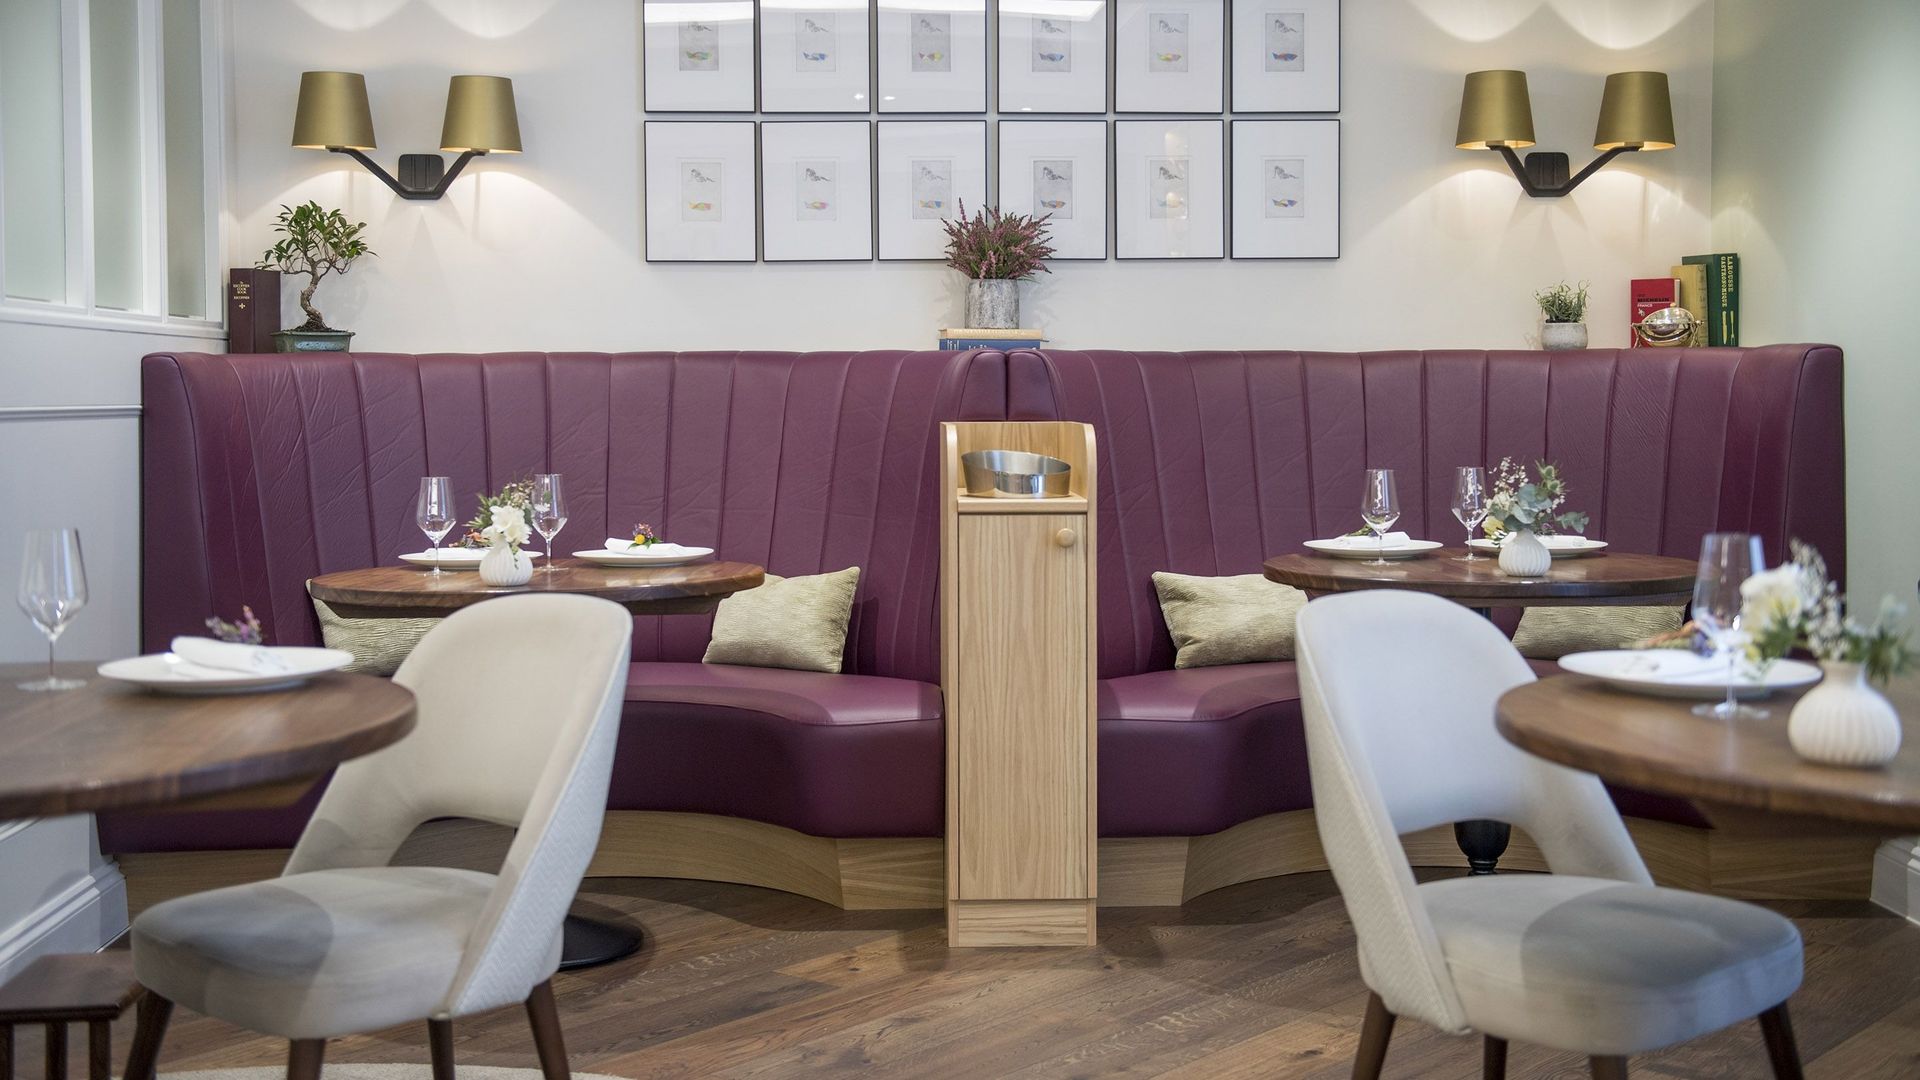 Le restaurant "Core by Clare Smyth", Notting Hill, Londres